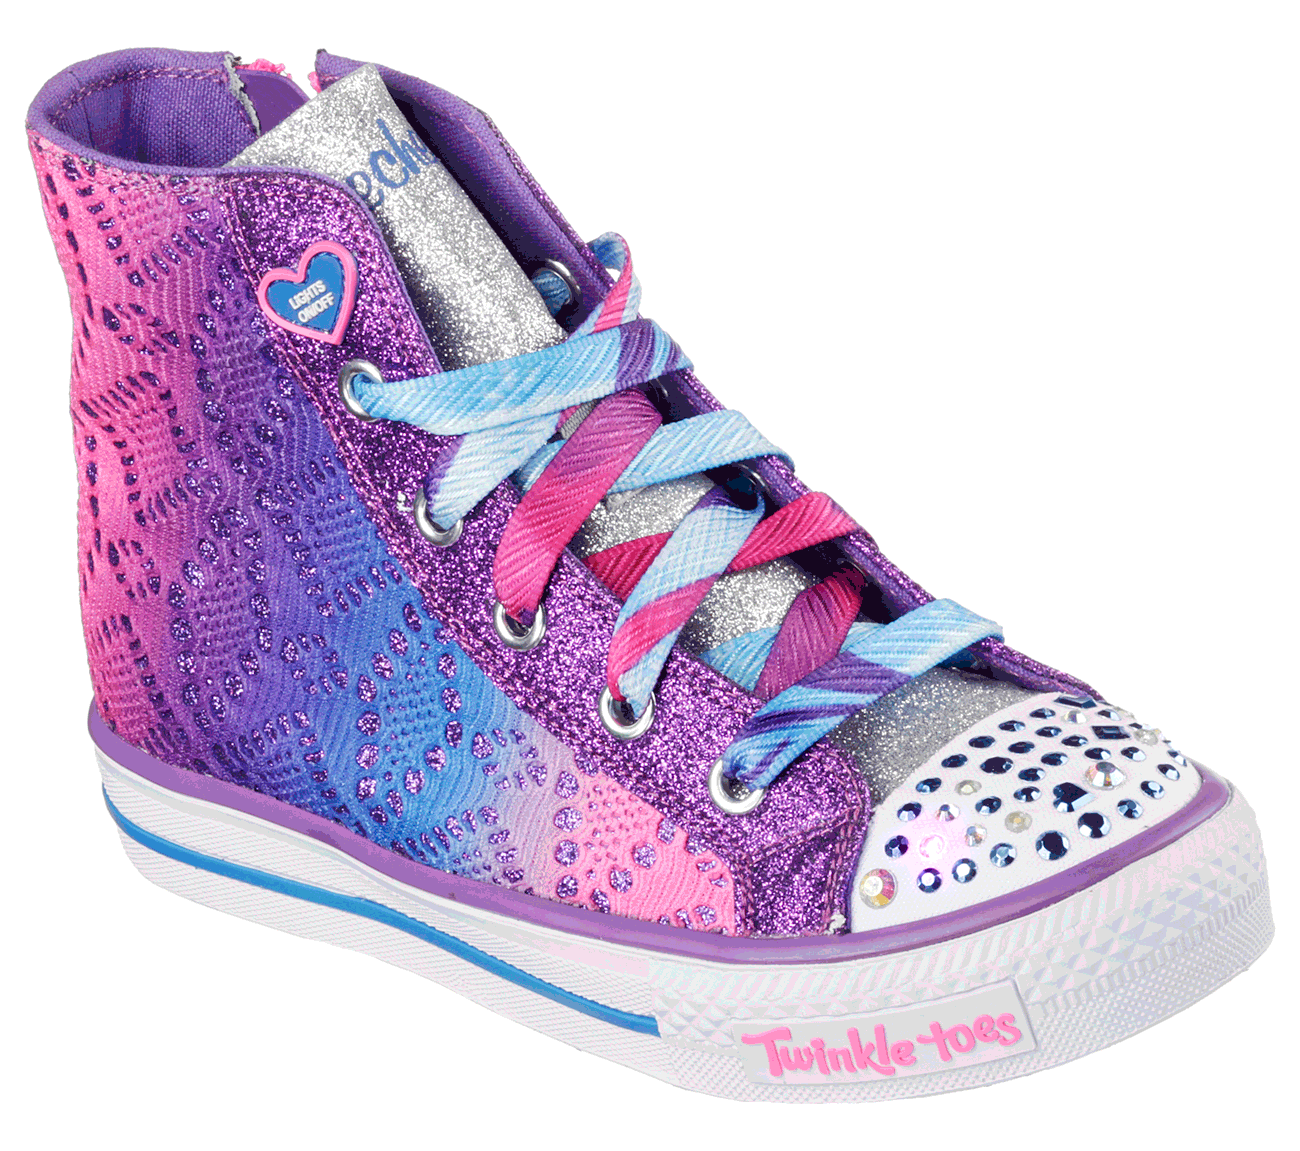 Buy SKECHERS Twinkle Toes: Shuffles - Magic Madness S-Lights Shoes